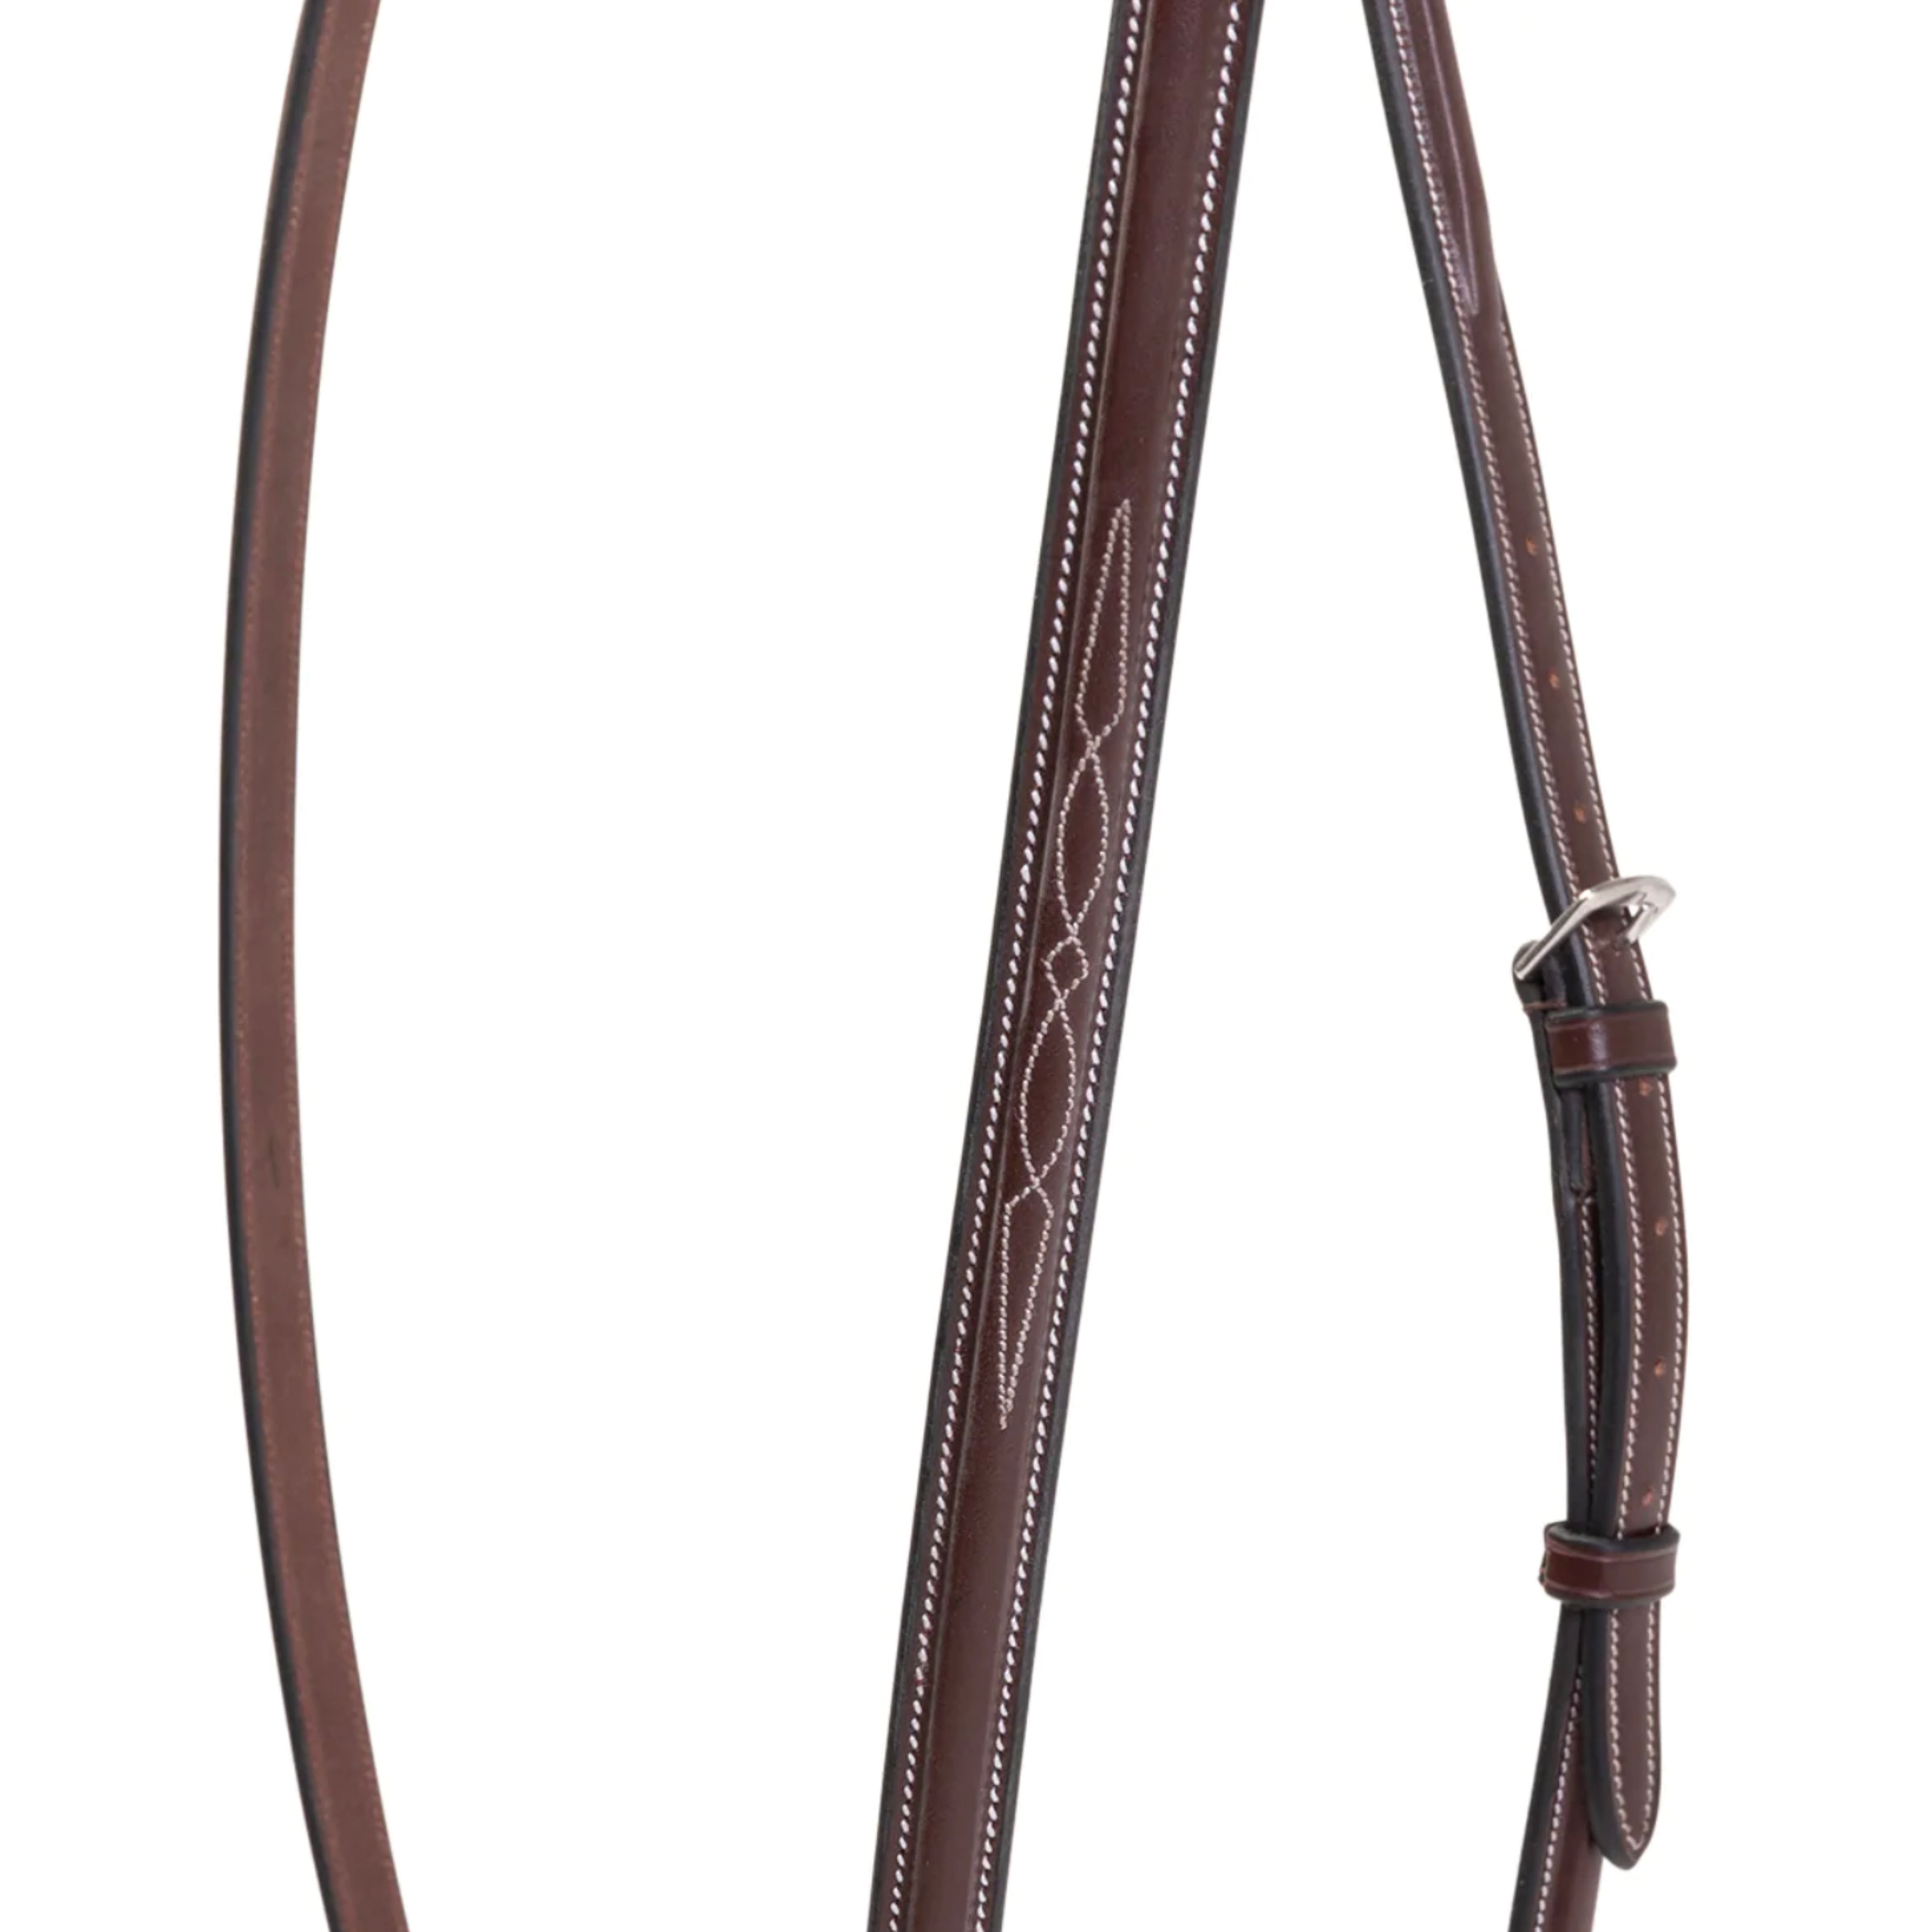 Sedgwick Fancy Standing Martingale